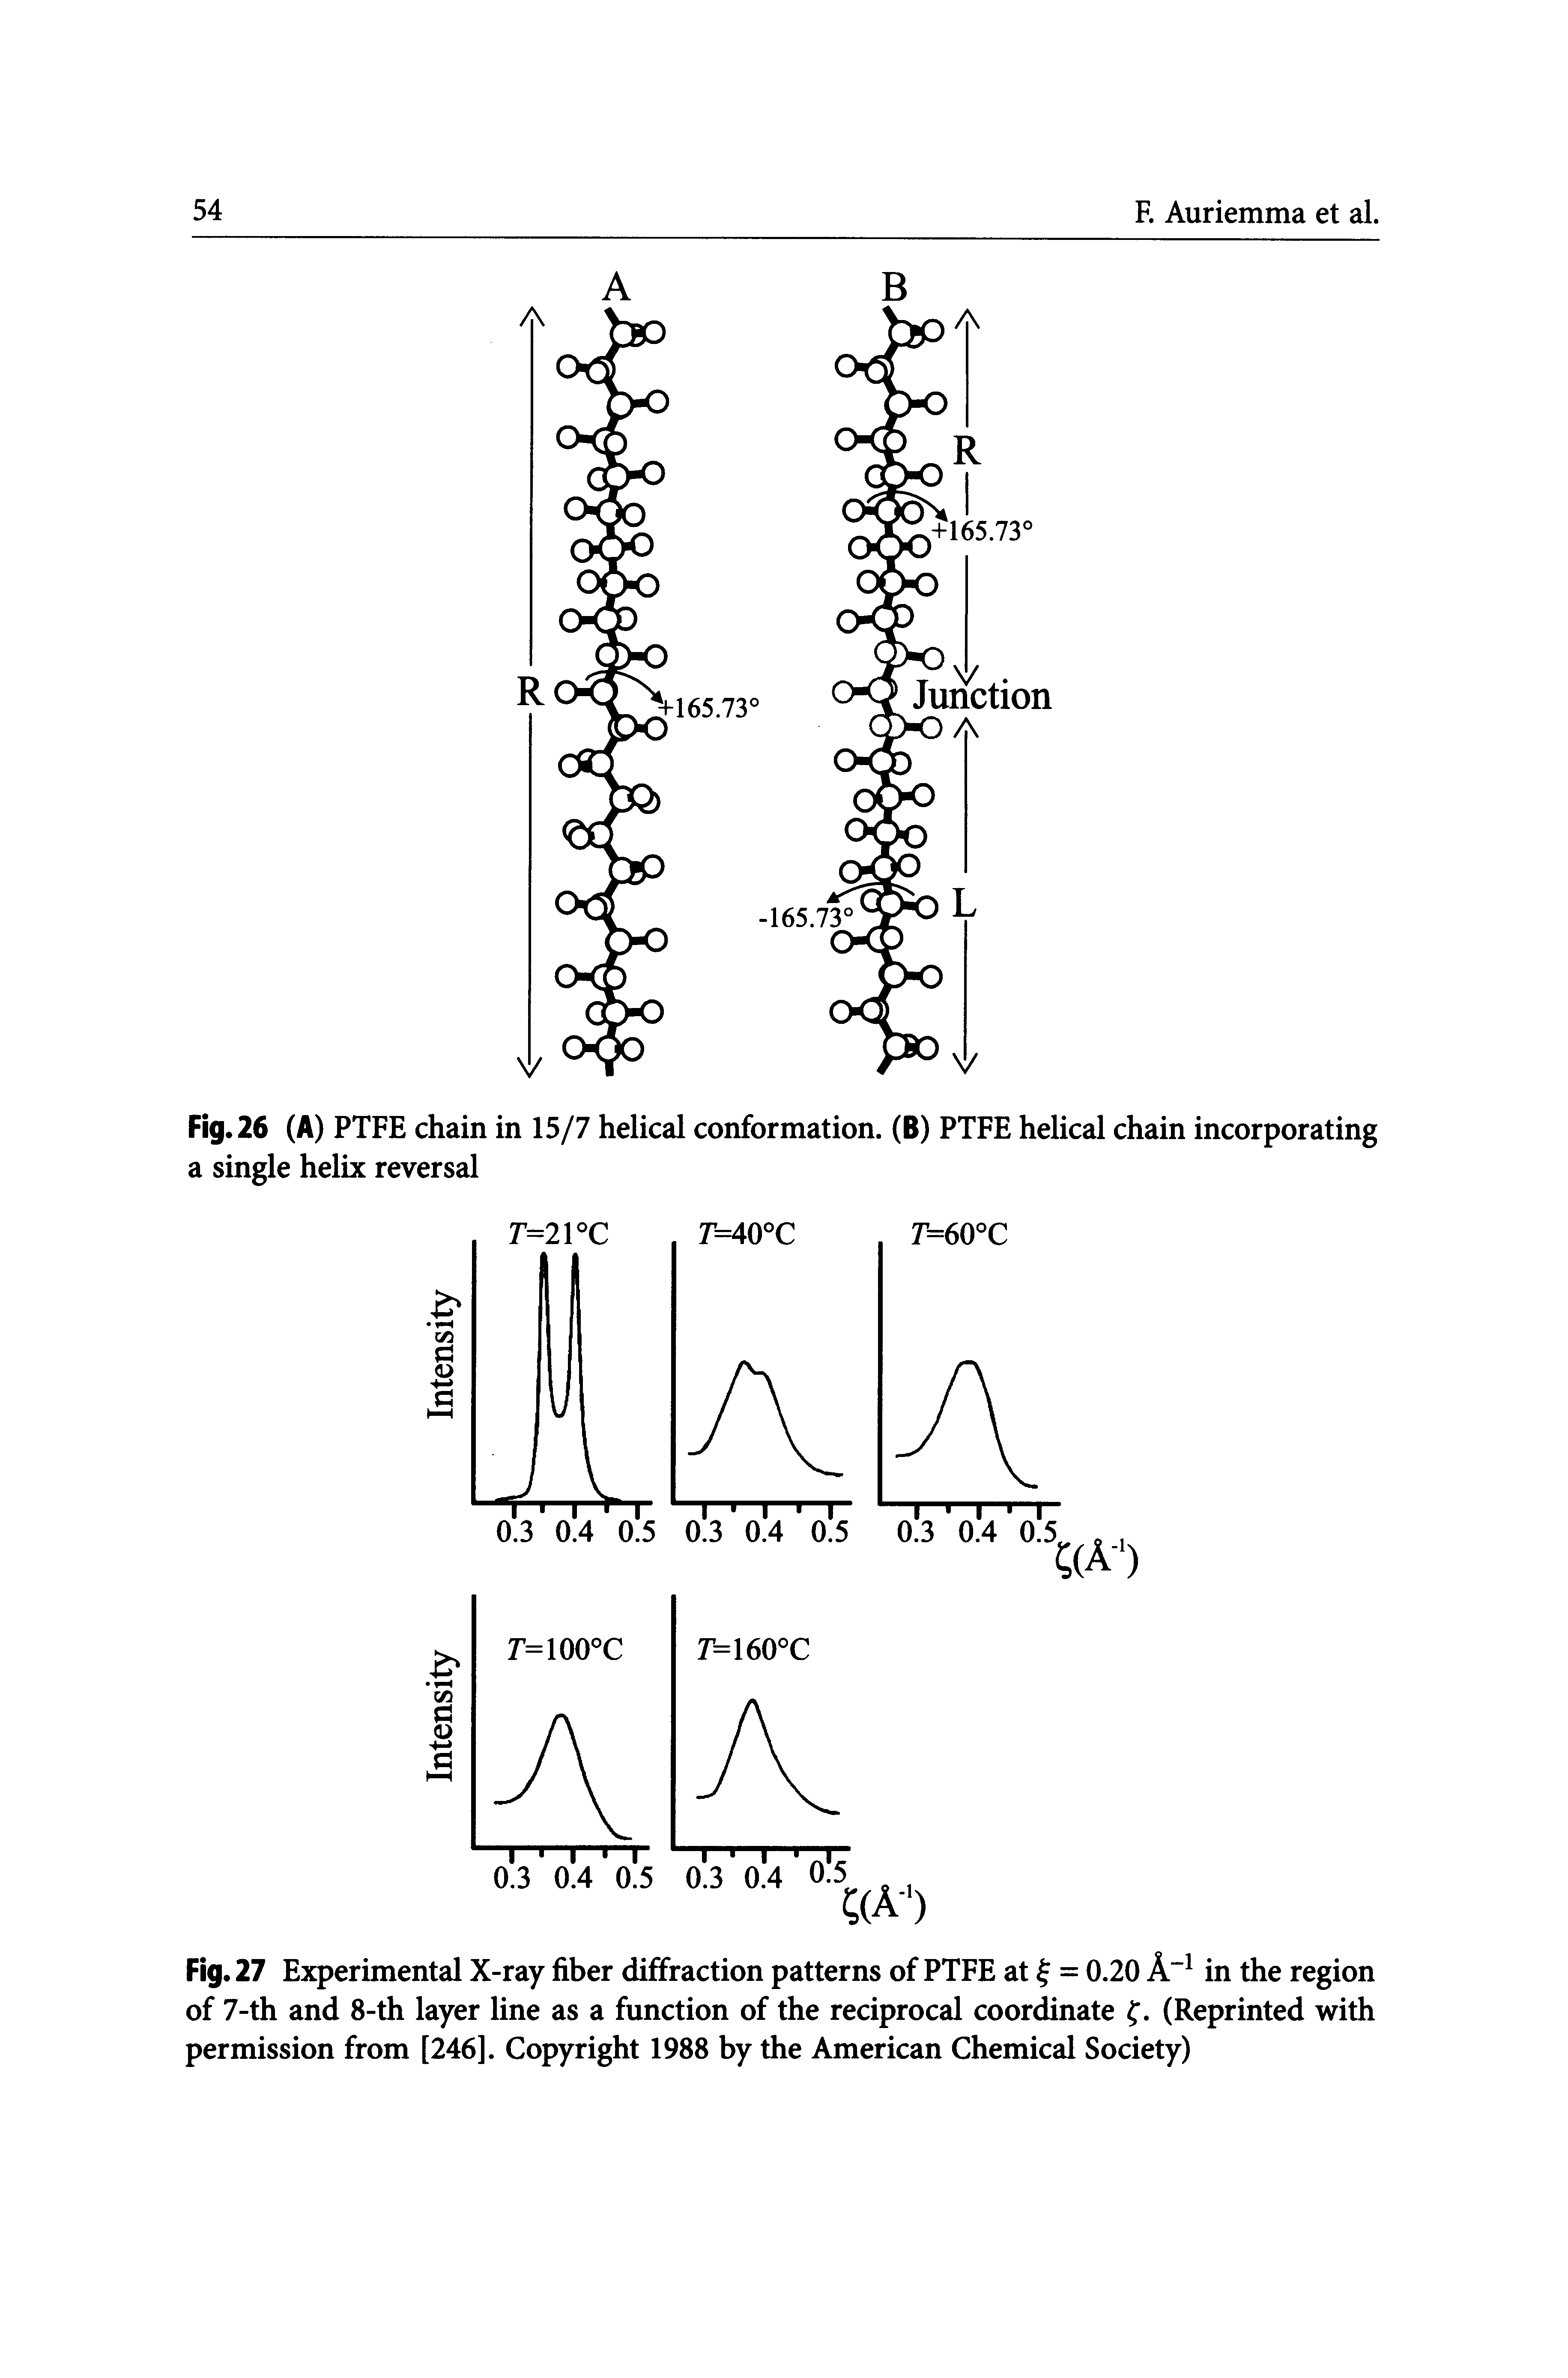 Fig. 27 Experimental X-ray fiber diffraction patterns of PTFE at = 0.20 A in the region of 7-th and 8-th layer line as a function of the reciprocal coordinate f. (Reprinted with permission from [246]. Copyright 1988 by the American Chemical Society)...